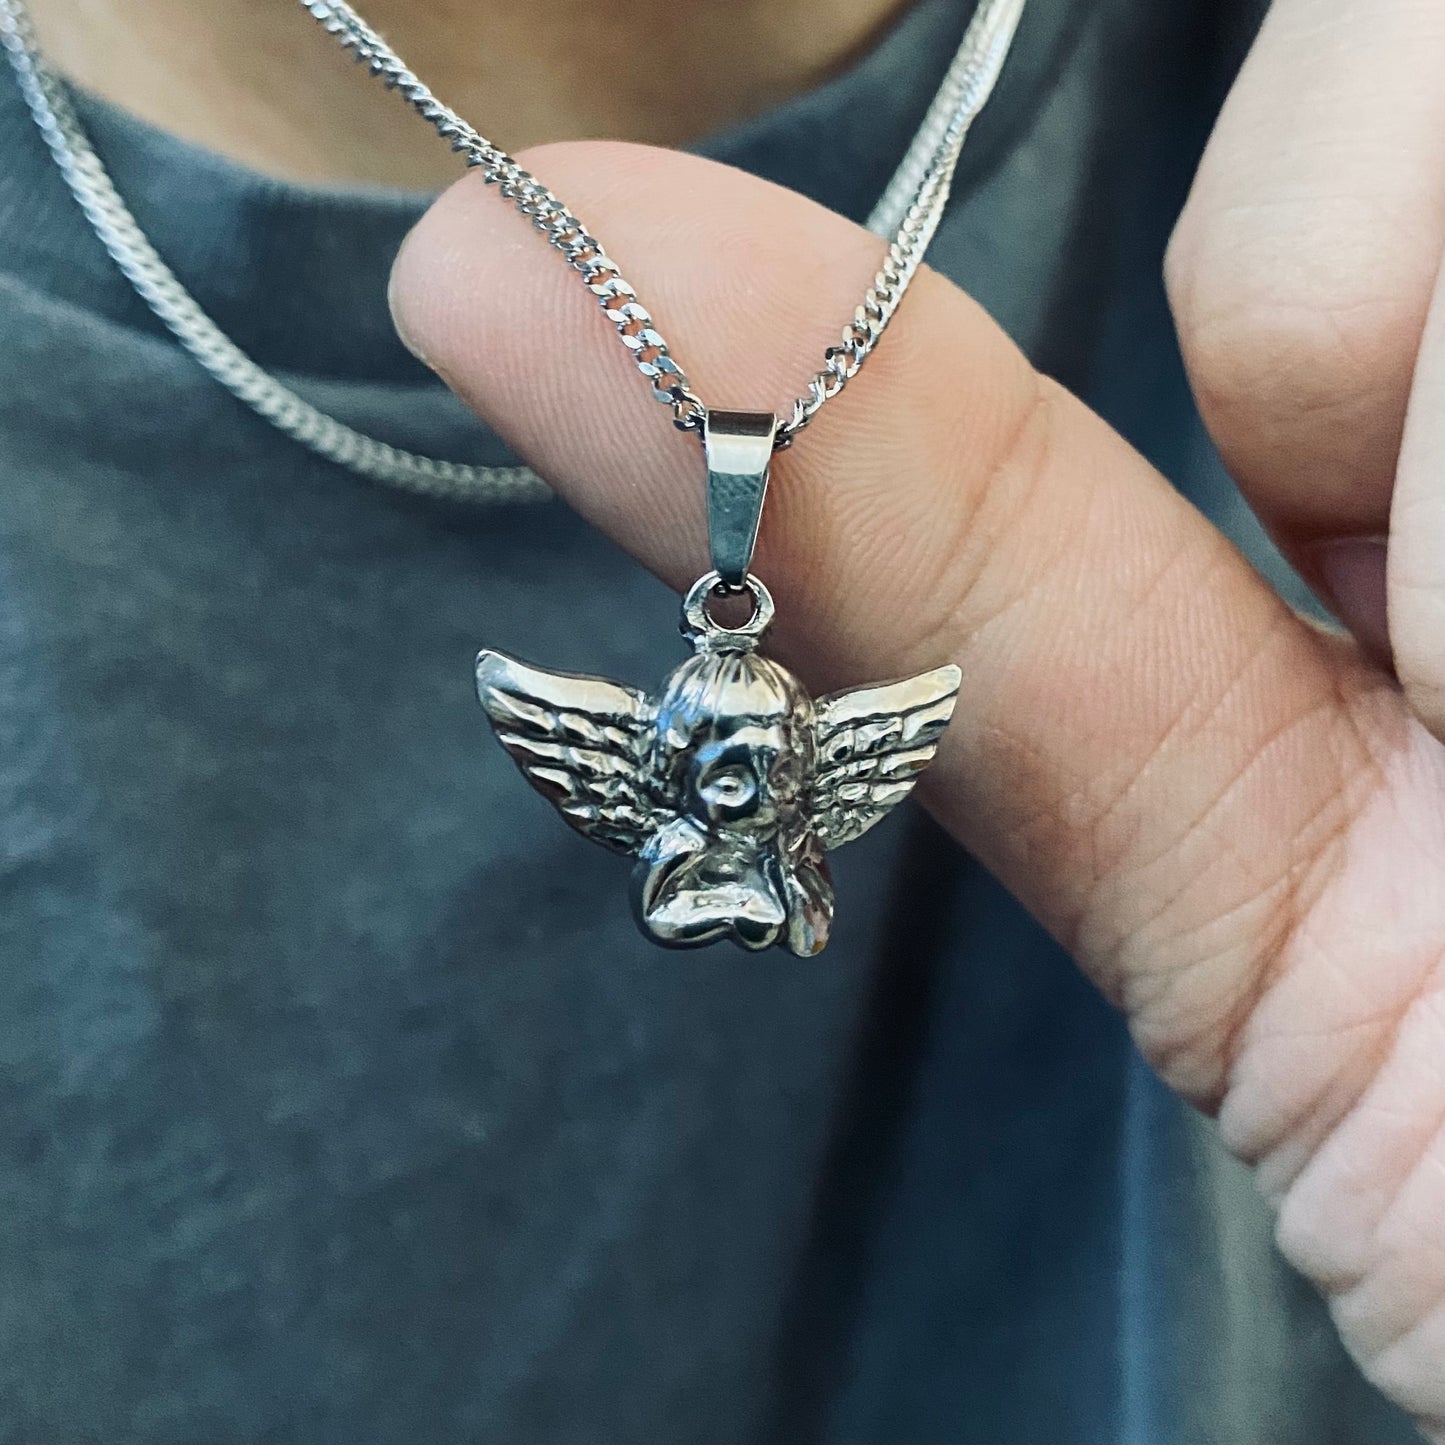 Baby Angel Pendant with Chain